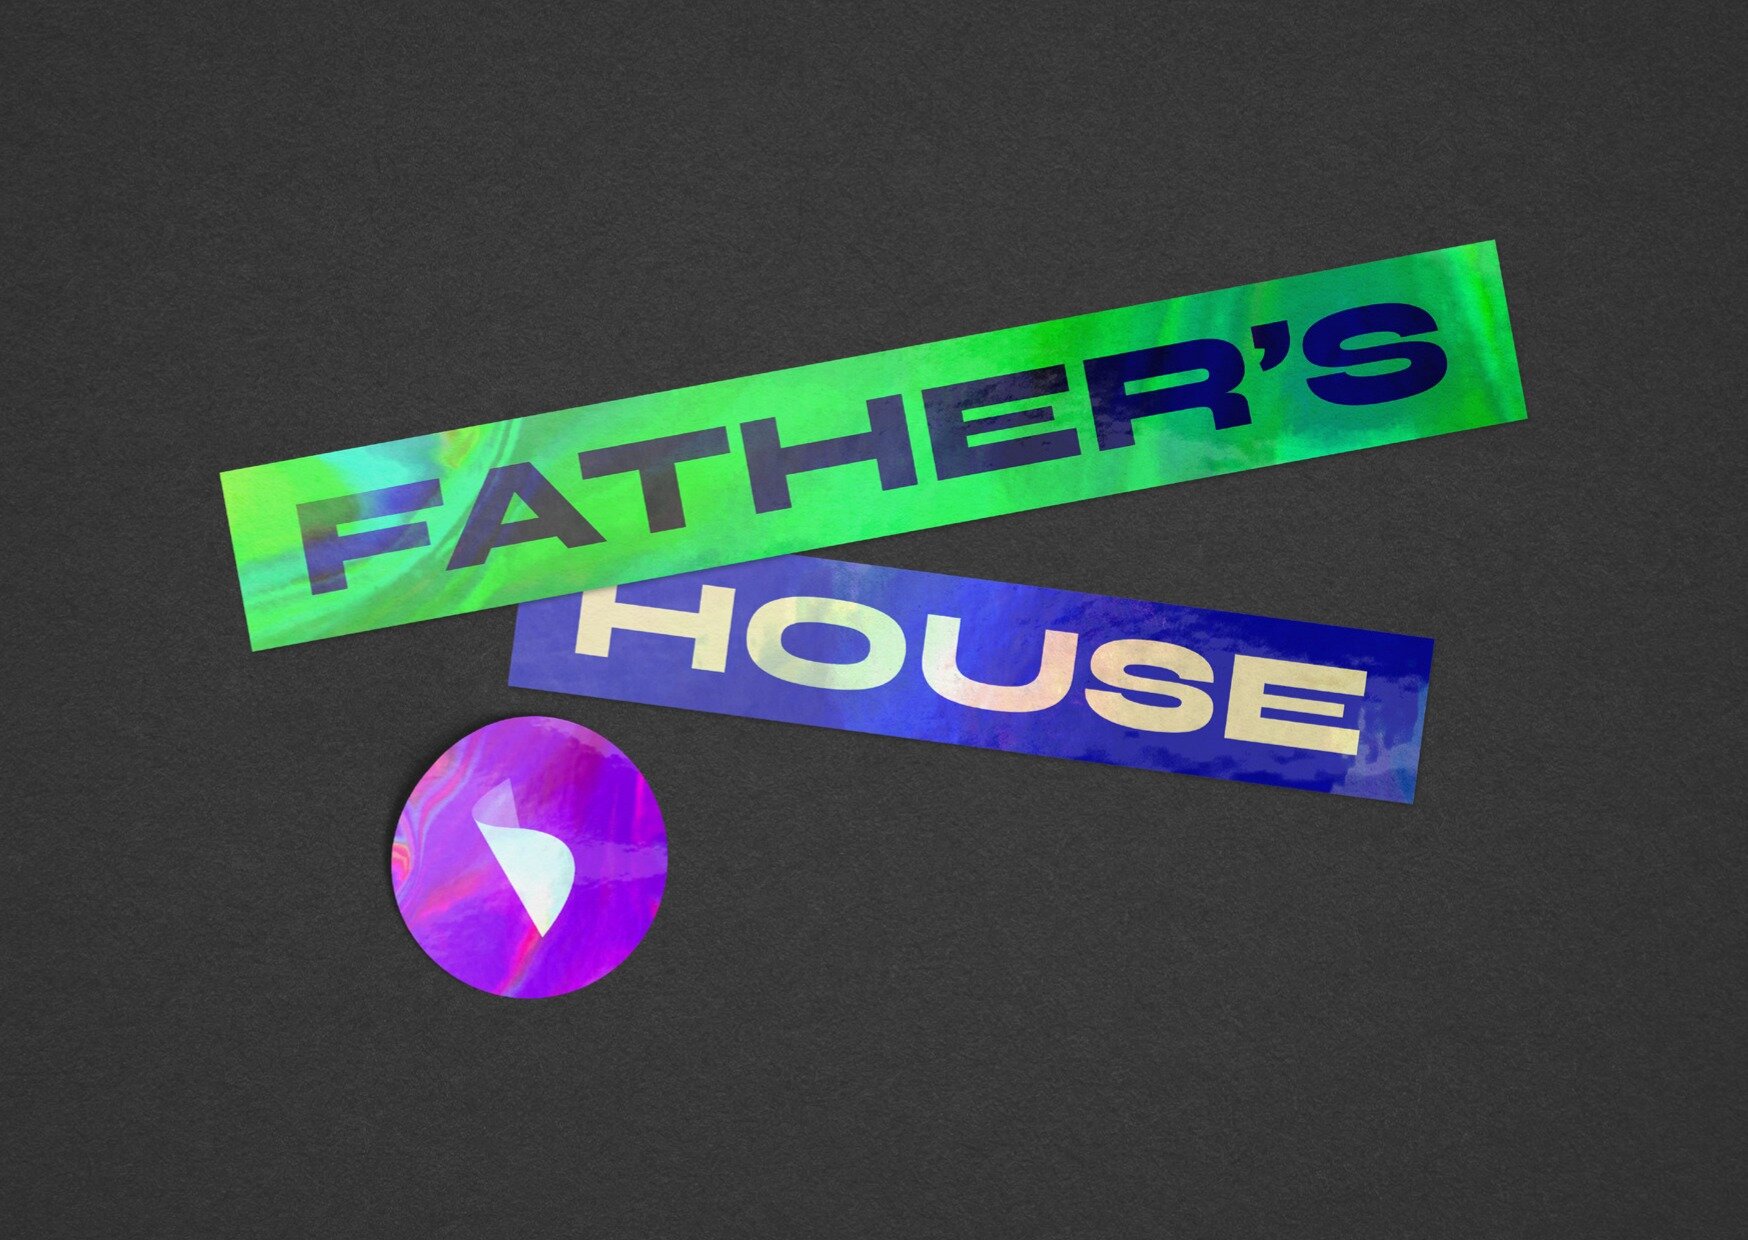 Father's House is back this Sunday! Starting at 10:20am on the first Sunday of every month, this is a full service for years R to 7. See you there!